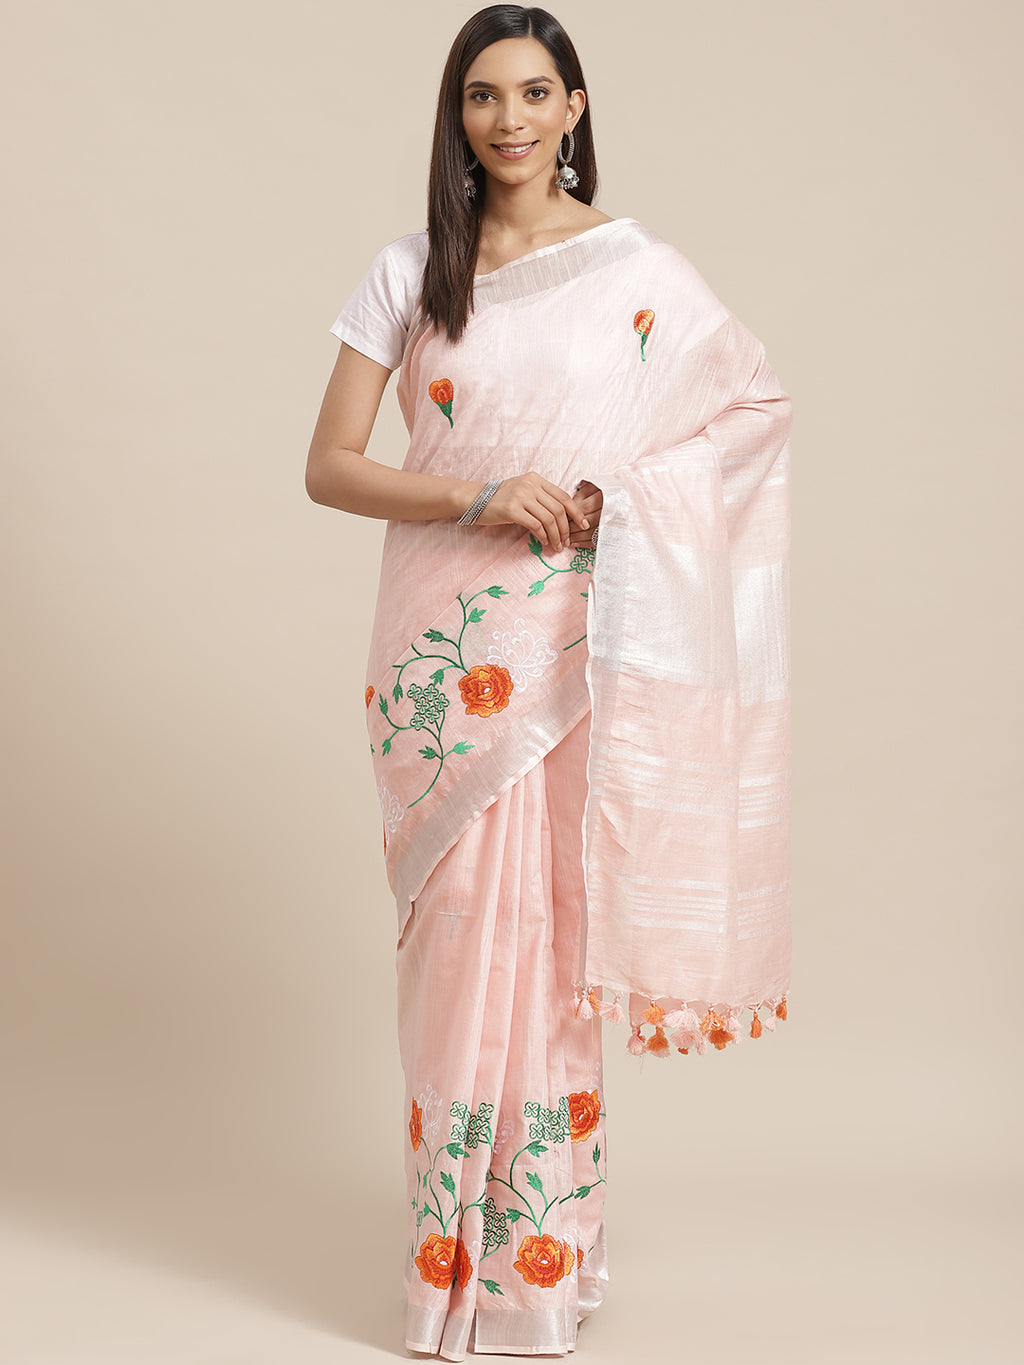 Peach and Orange, Kalakari India Linen Handwoven Saree and Blouse ALBGSA0088-Saree-Kalakari India-ALBGSA0088-Cotton, Geographical Indication, Hand Crafted, Heritage Prints, Linen, Natural Dyes, Red, Sarees, Shibori, Sustainable Fabrics, Woven, Yellow-[Linen,Ethnic,wear,Fashionista,Handloom,Handicraft,Indigo,blockprint,block,print,Cotton,Chanderi,Blue, latest,classy,party,bollywood,trendy,summer,style,traditional,formal,elegant,unique,style,hand,block,print, dabu,booti,gift,present,glamorous,affo